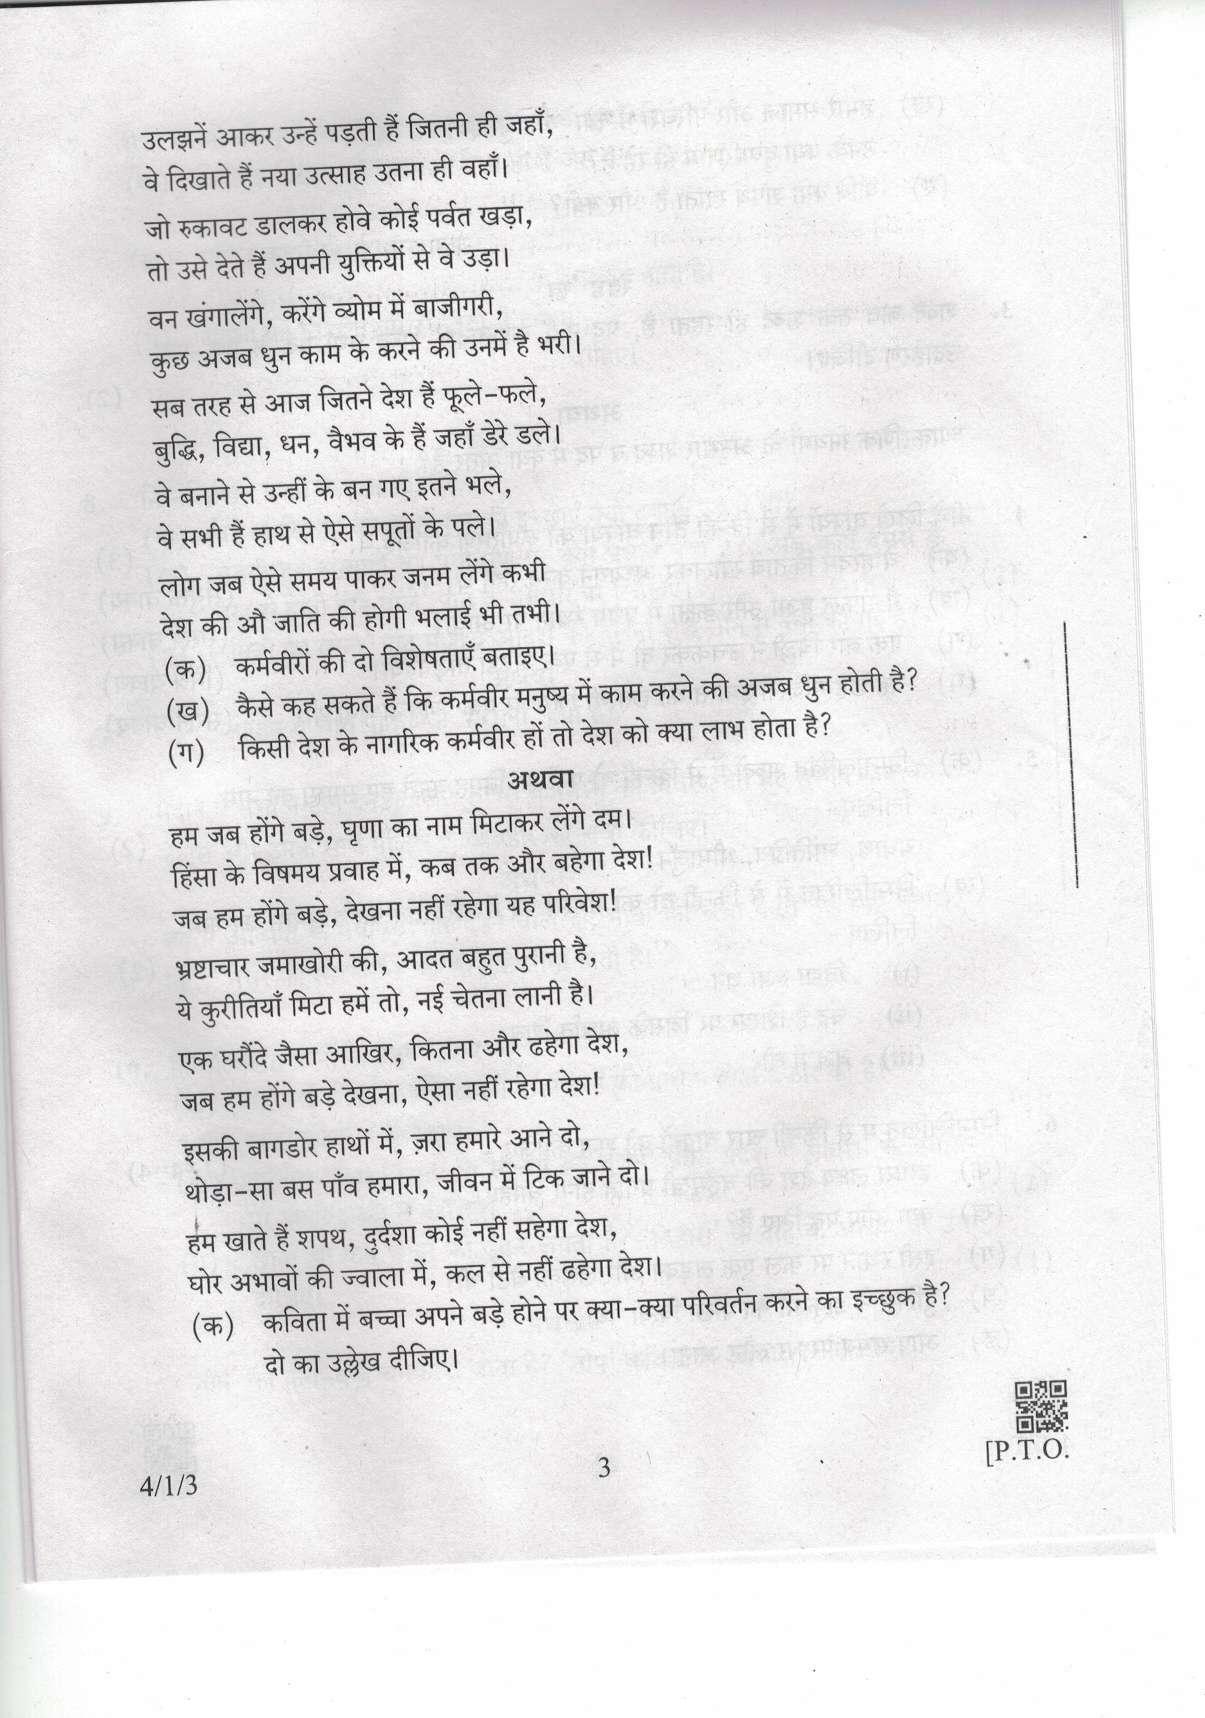 CBSE Class 10 4-1-3 Hindi-B 2019 Question Paper - Page 3